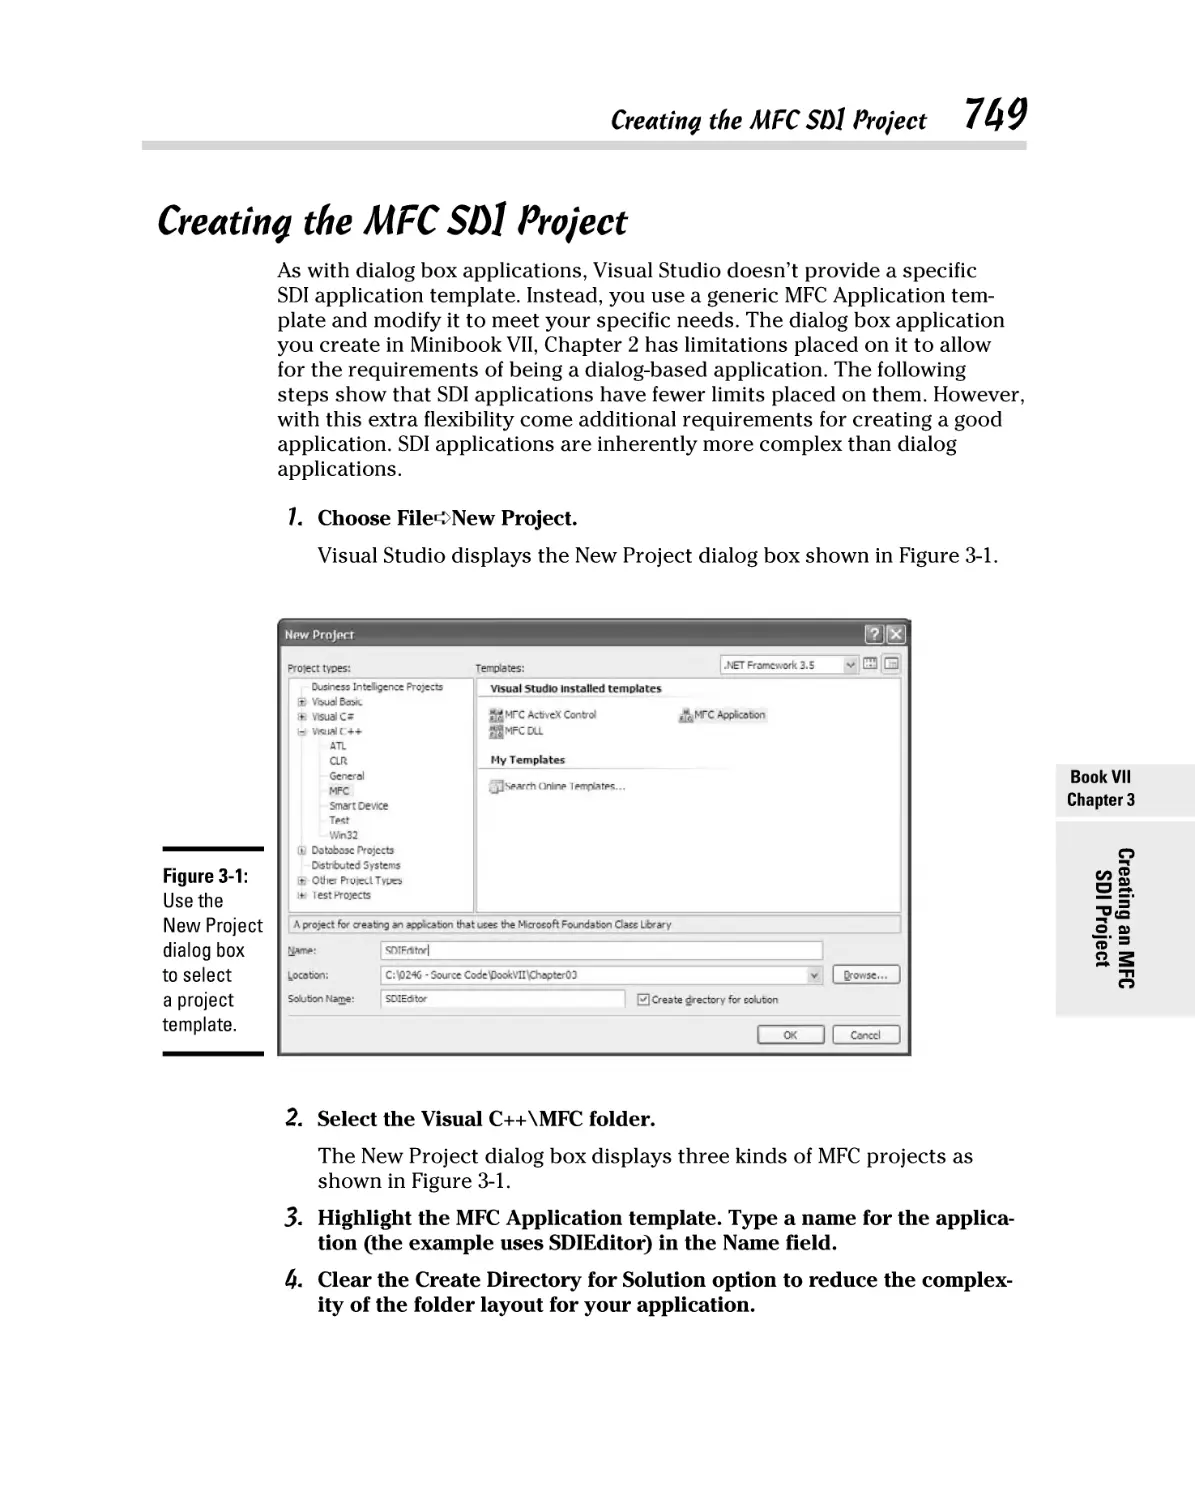 Creating the MFC SDI Project